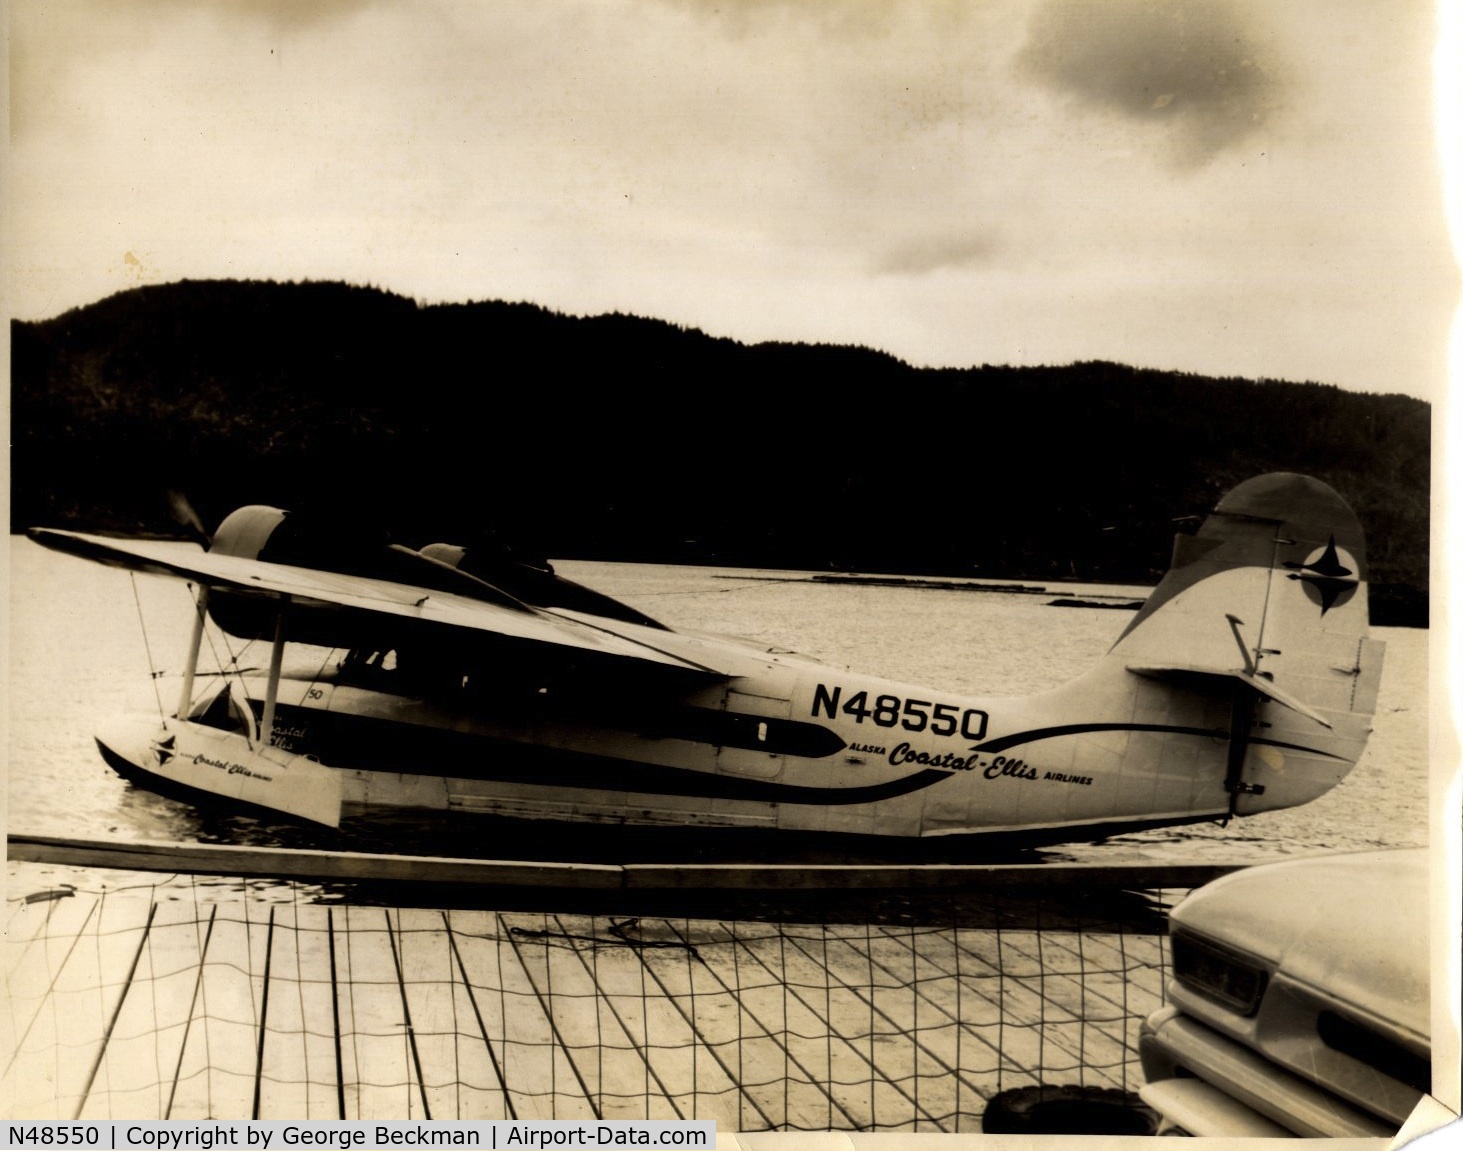 N48550, 1939 Grumman G-21A Goose C/N 1061, This was taken in Thorne Bay Alaska, 1964. Thorne Bay was then the major logging camp for Ketchican Pulp Company. I worked as a camp flunky and lugged a 4X5 Speed Graphic around.